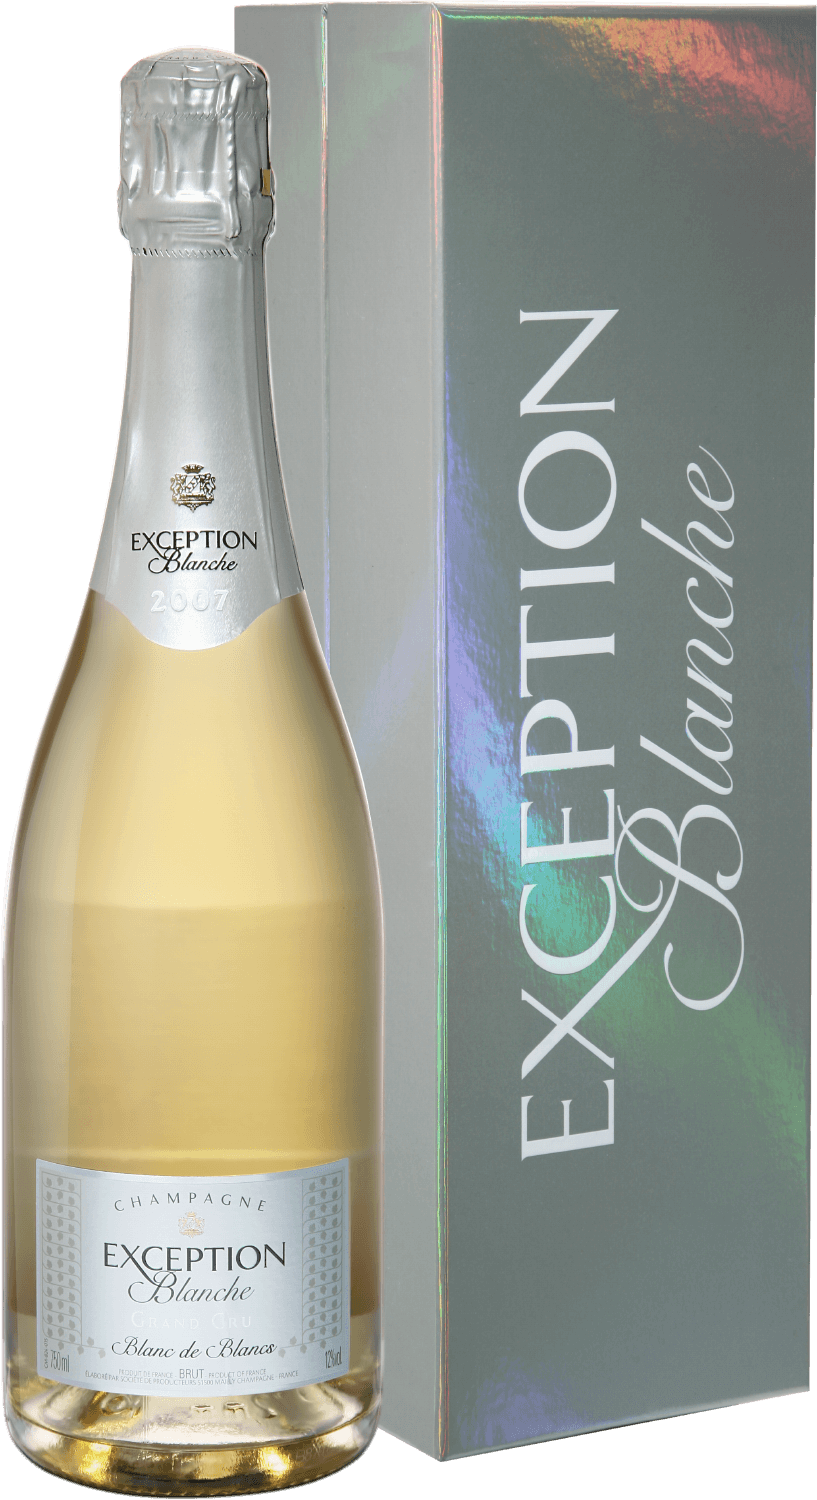 Mailly Grand Cru Exception Blanche Blanc De Blancs Millesime Champagne AOC (gift box) mailly grand cru rose de mailly brut champagne aoc